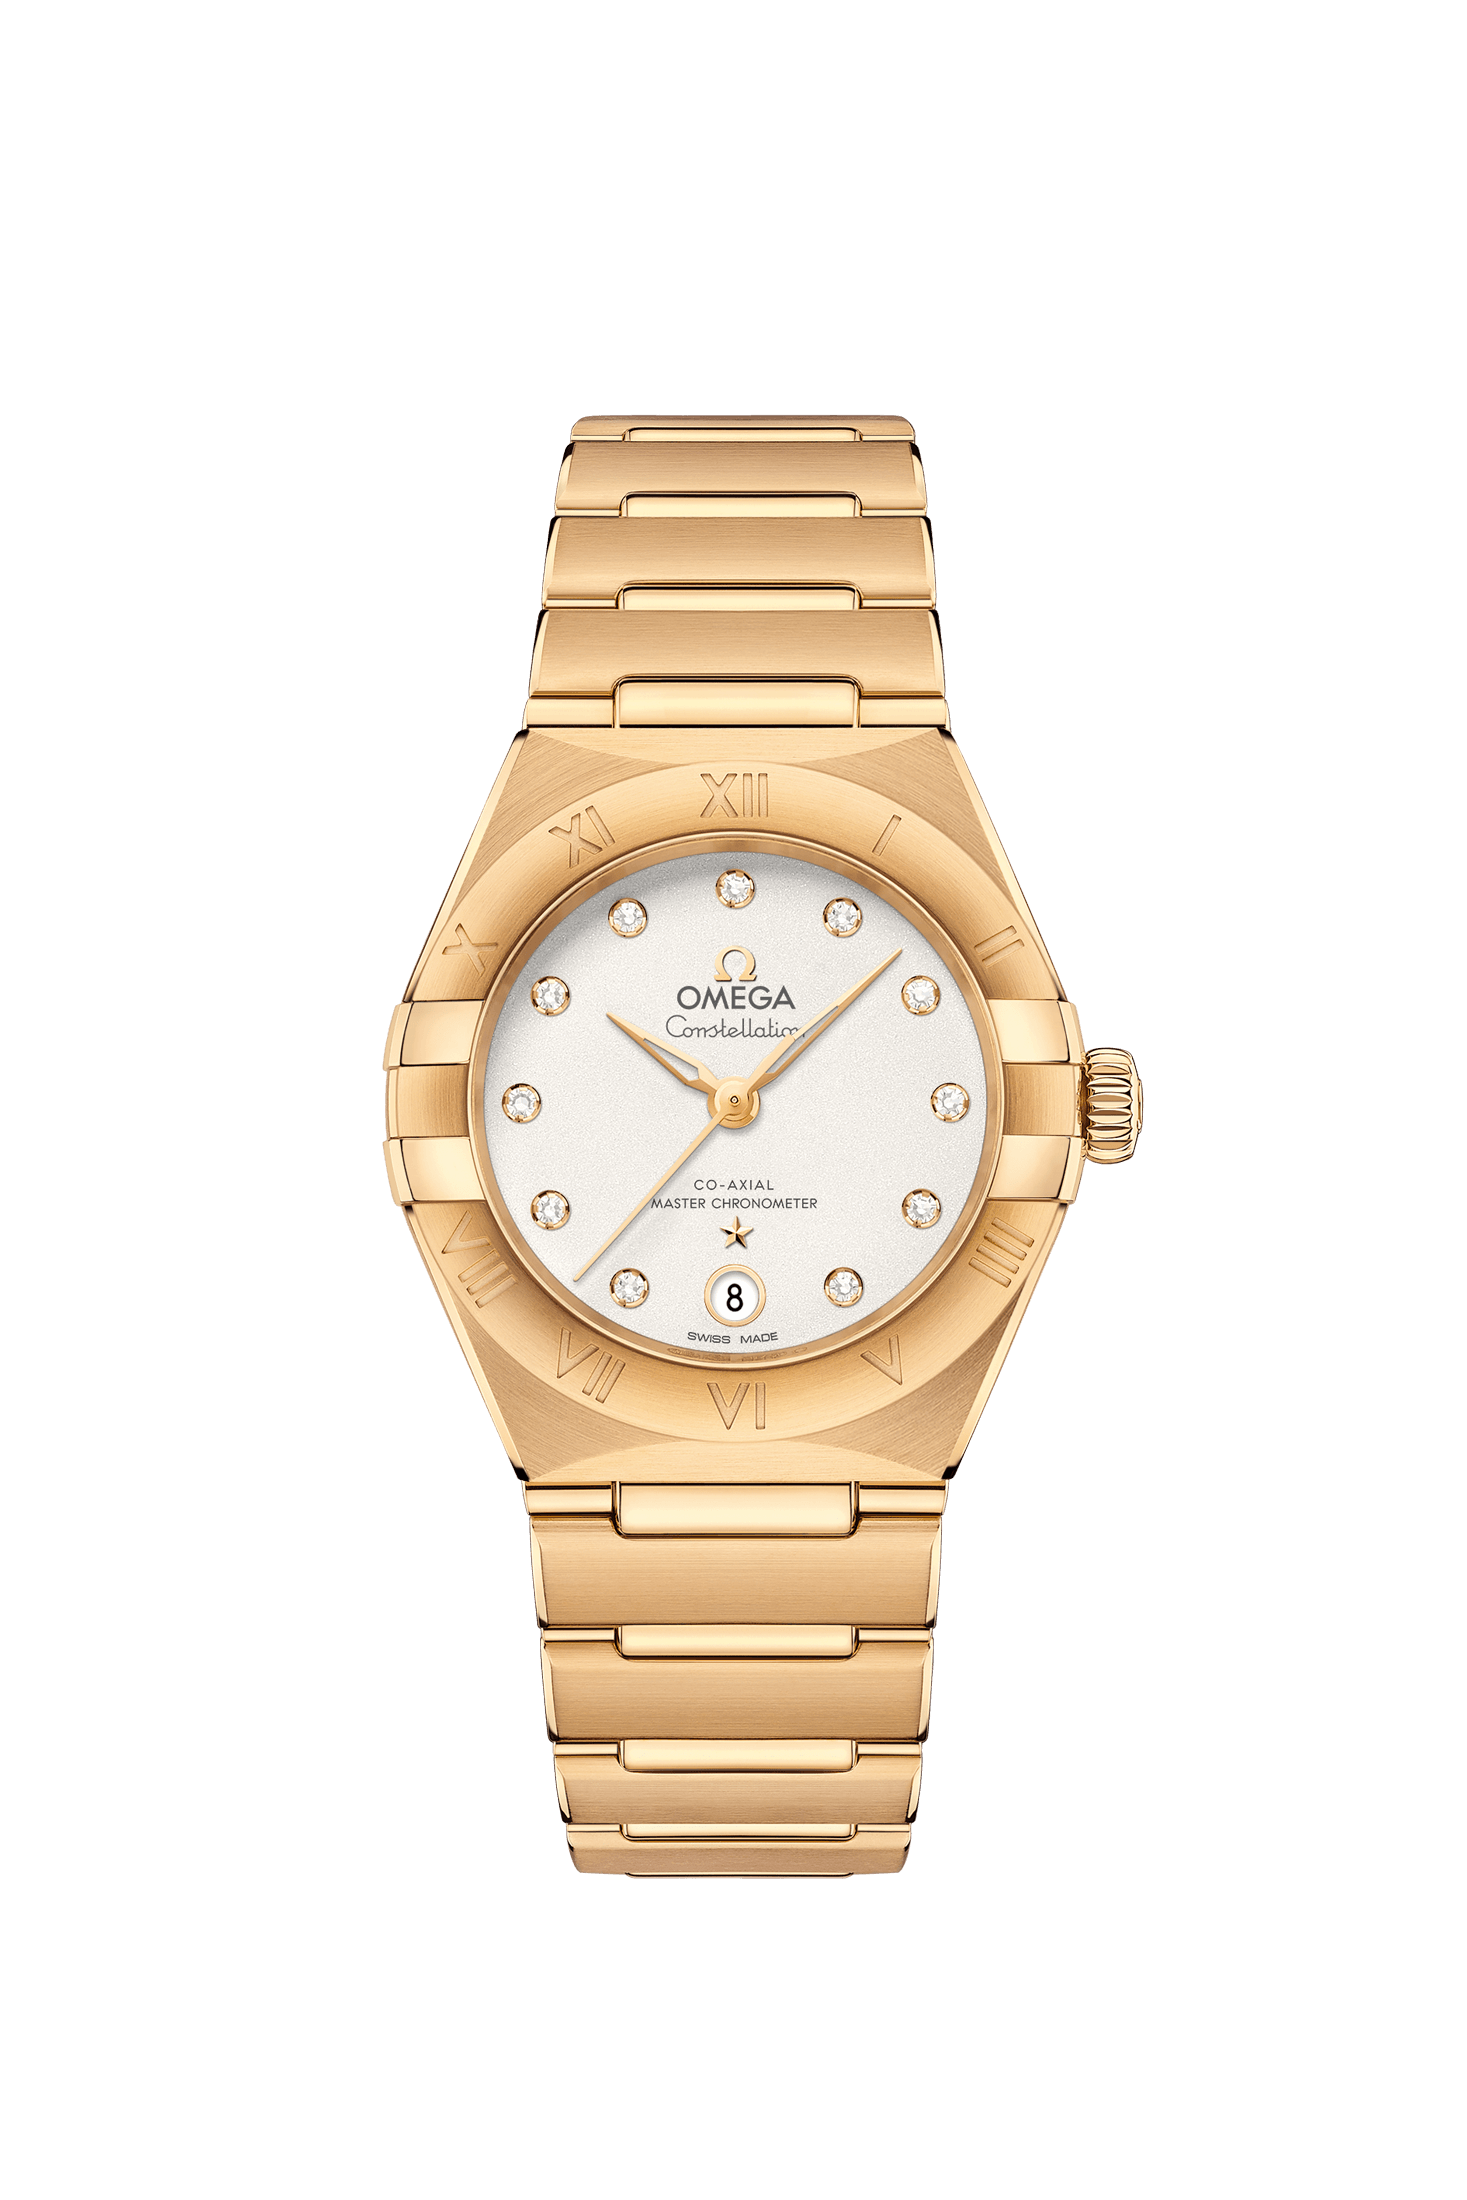 Ladies' watch  OMEGA, Constellation Co Axial Master Chronometer / 29mm, SKU: 131.50.29.20.52.002 | watchphilosophy.co.uk